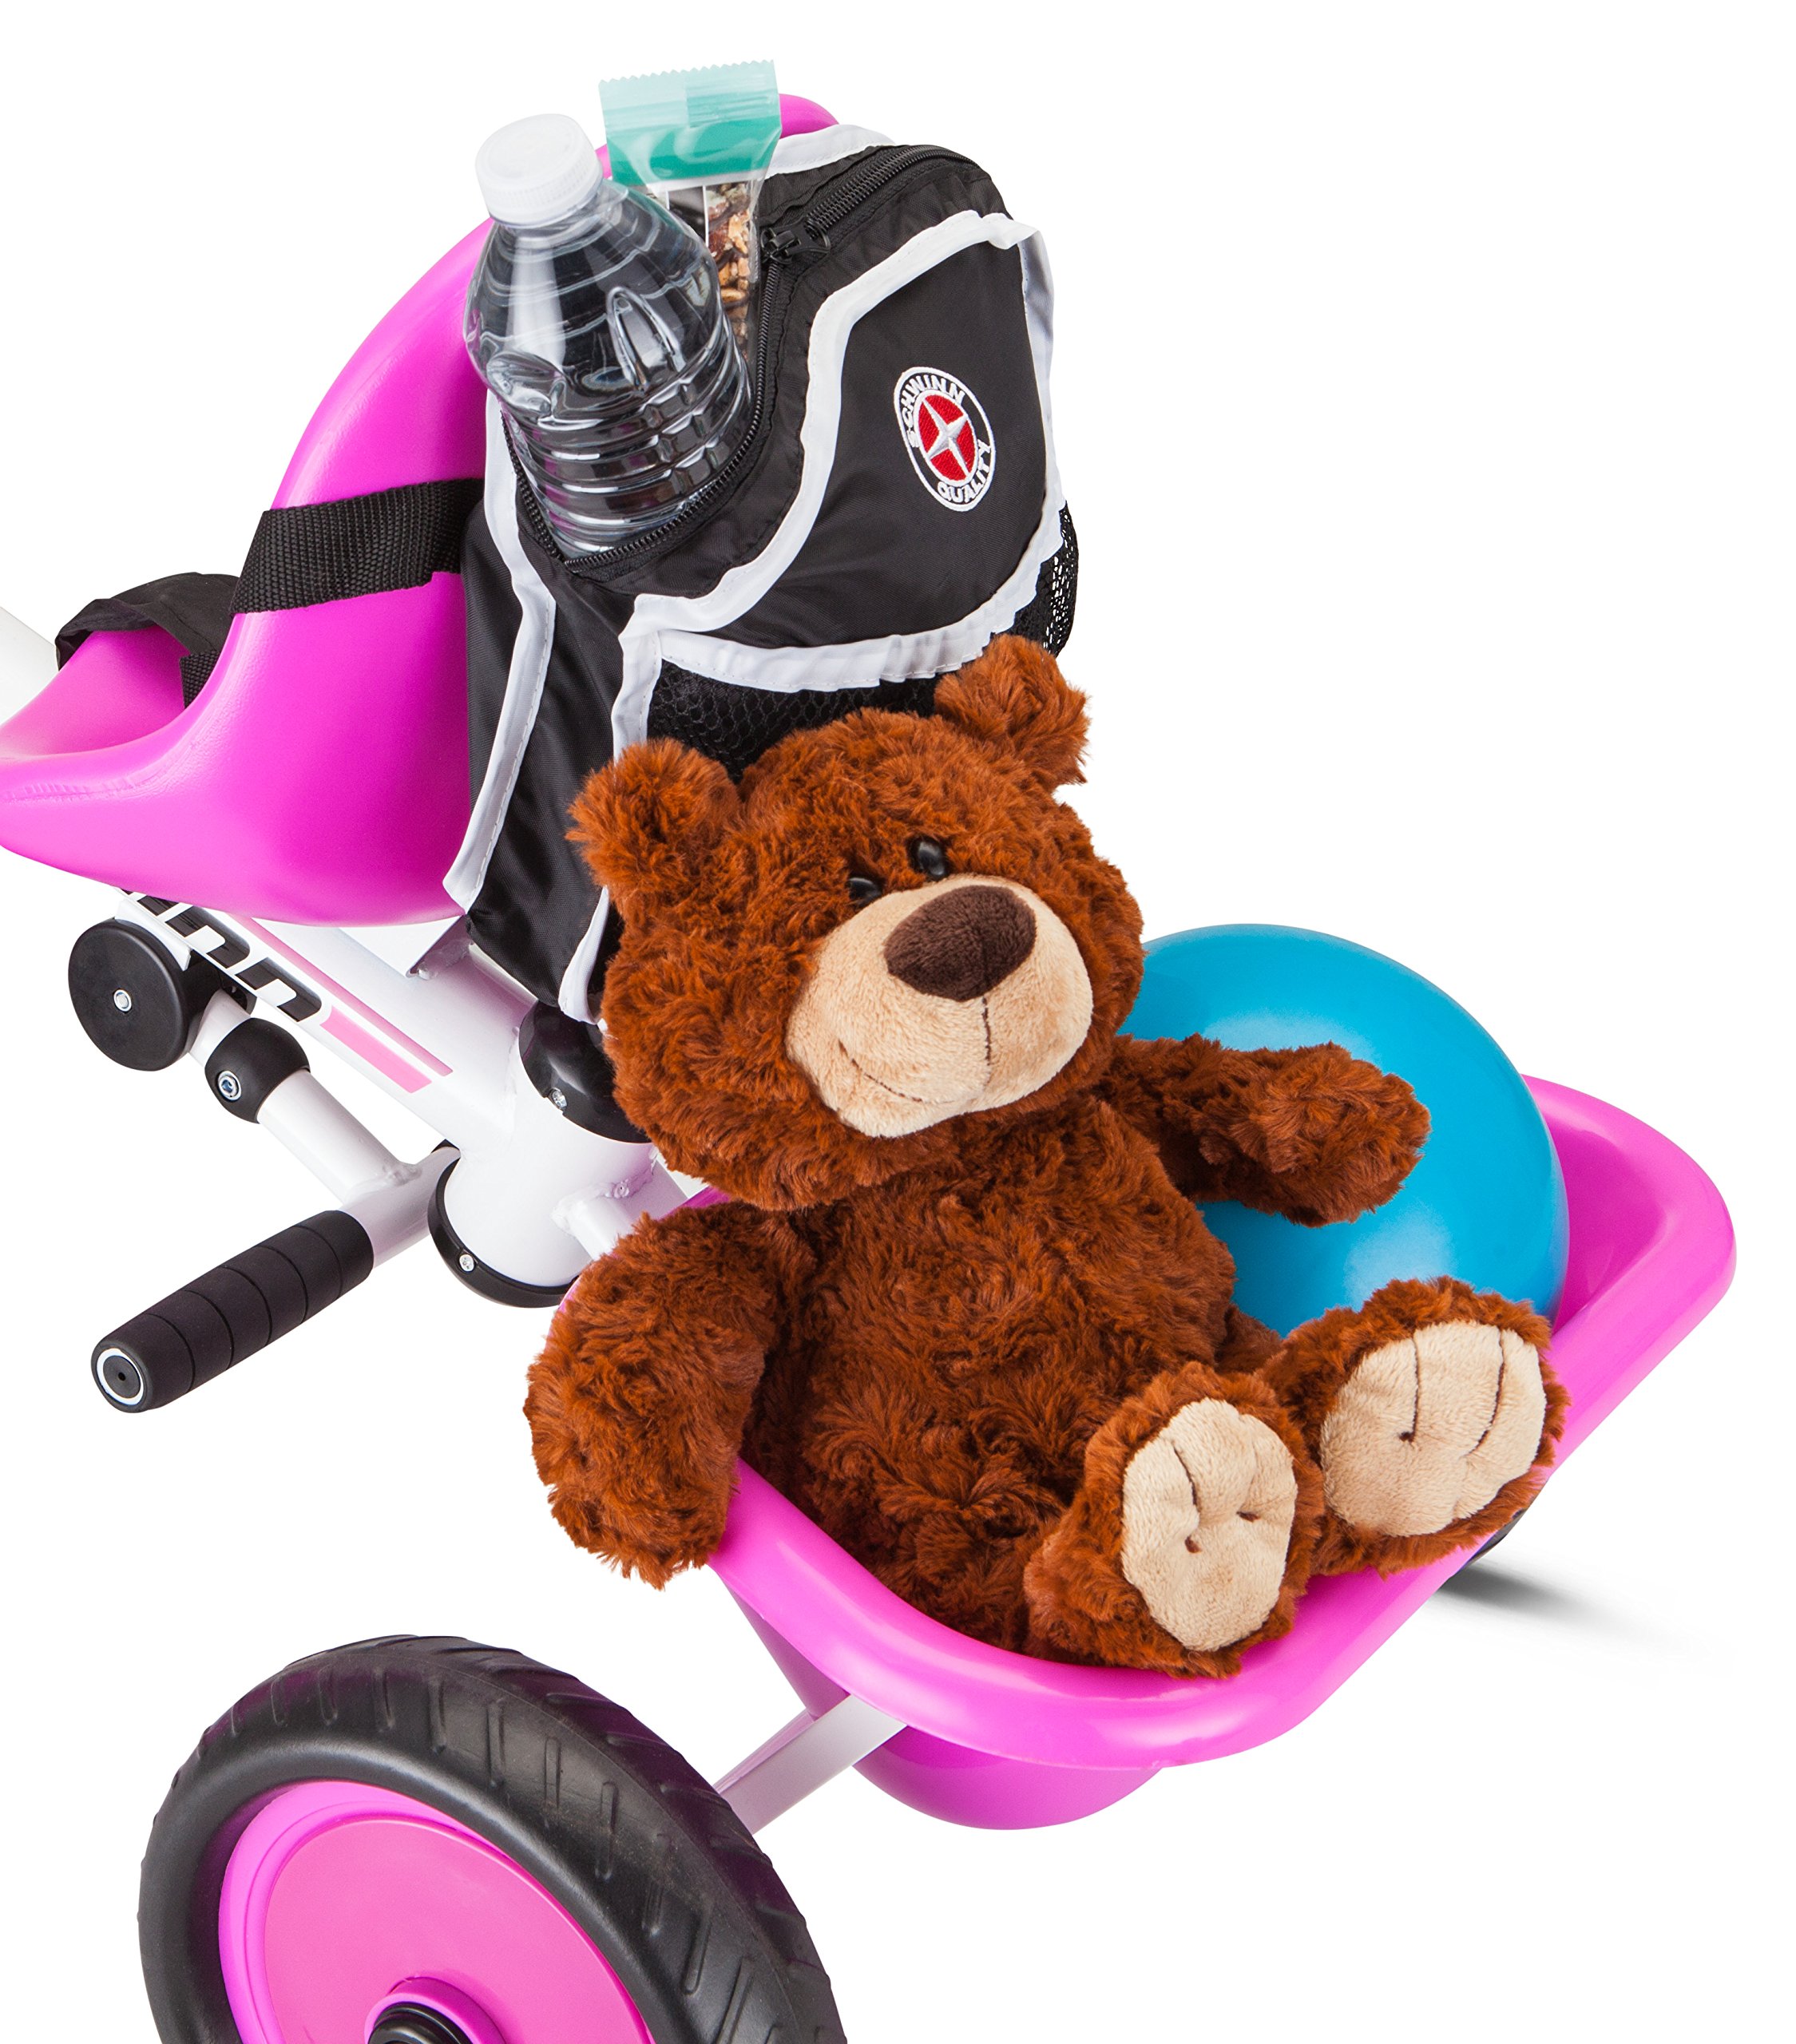 Schwinn Easy Steer Bike for Toddler, Kids Tricycle with Removable Push handle, Steel Trike Frame, Boys and Girls Ages 2-4 Year Old, Pink